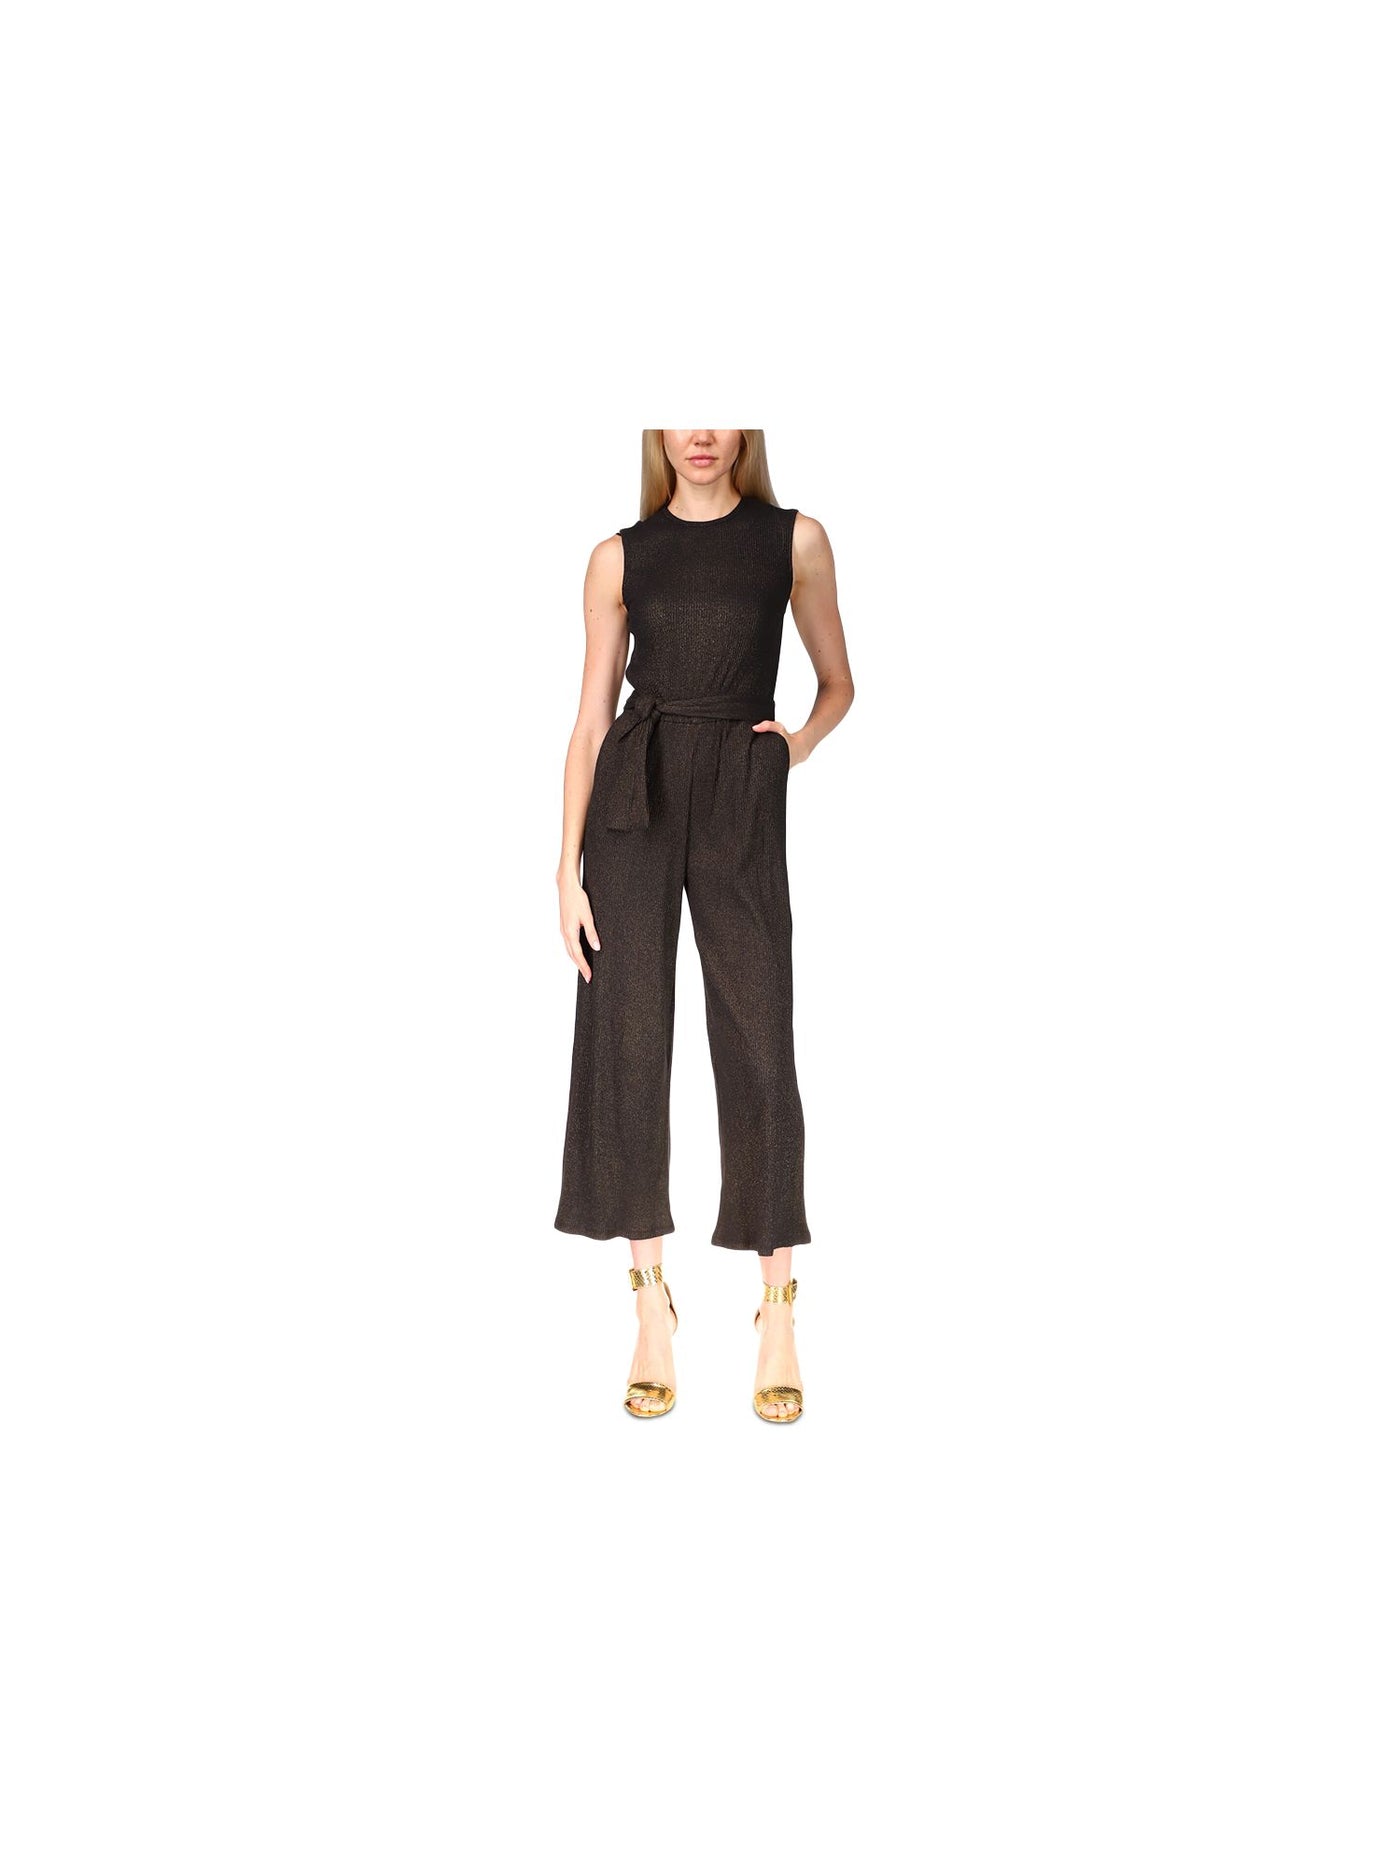 MICHAEL MICHAEL KORS Womens Black Zippered Pocketed Self-tie Belt Sleeveless Round Neck Party Cropped Jumpsuit P\XL